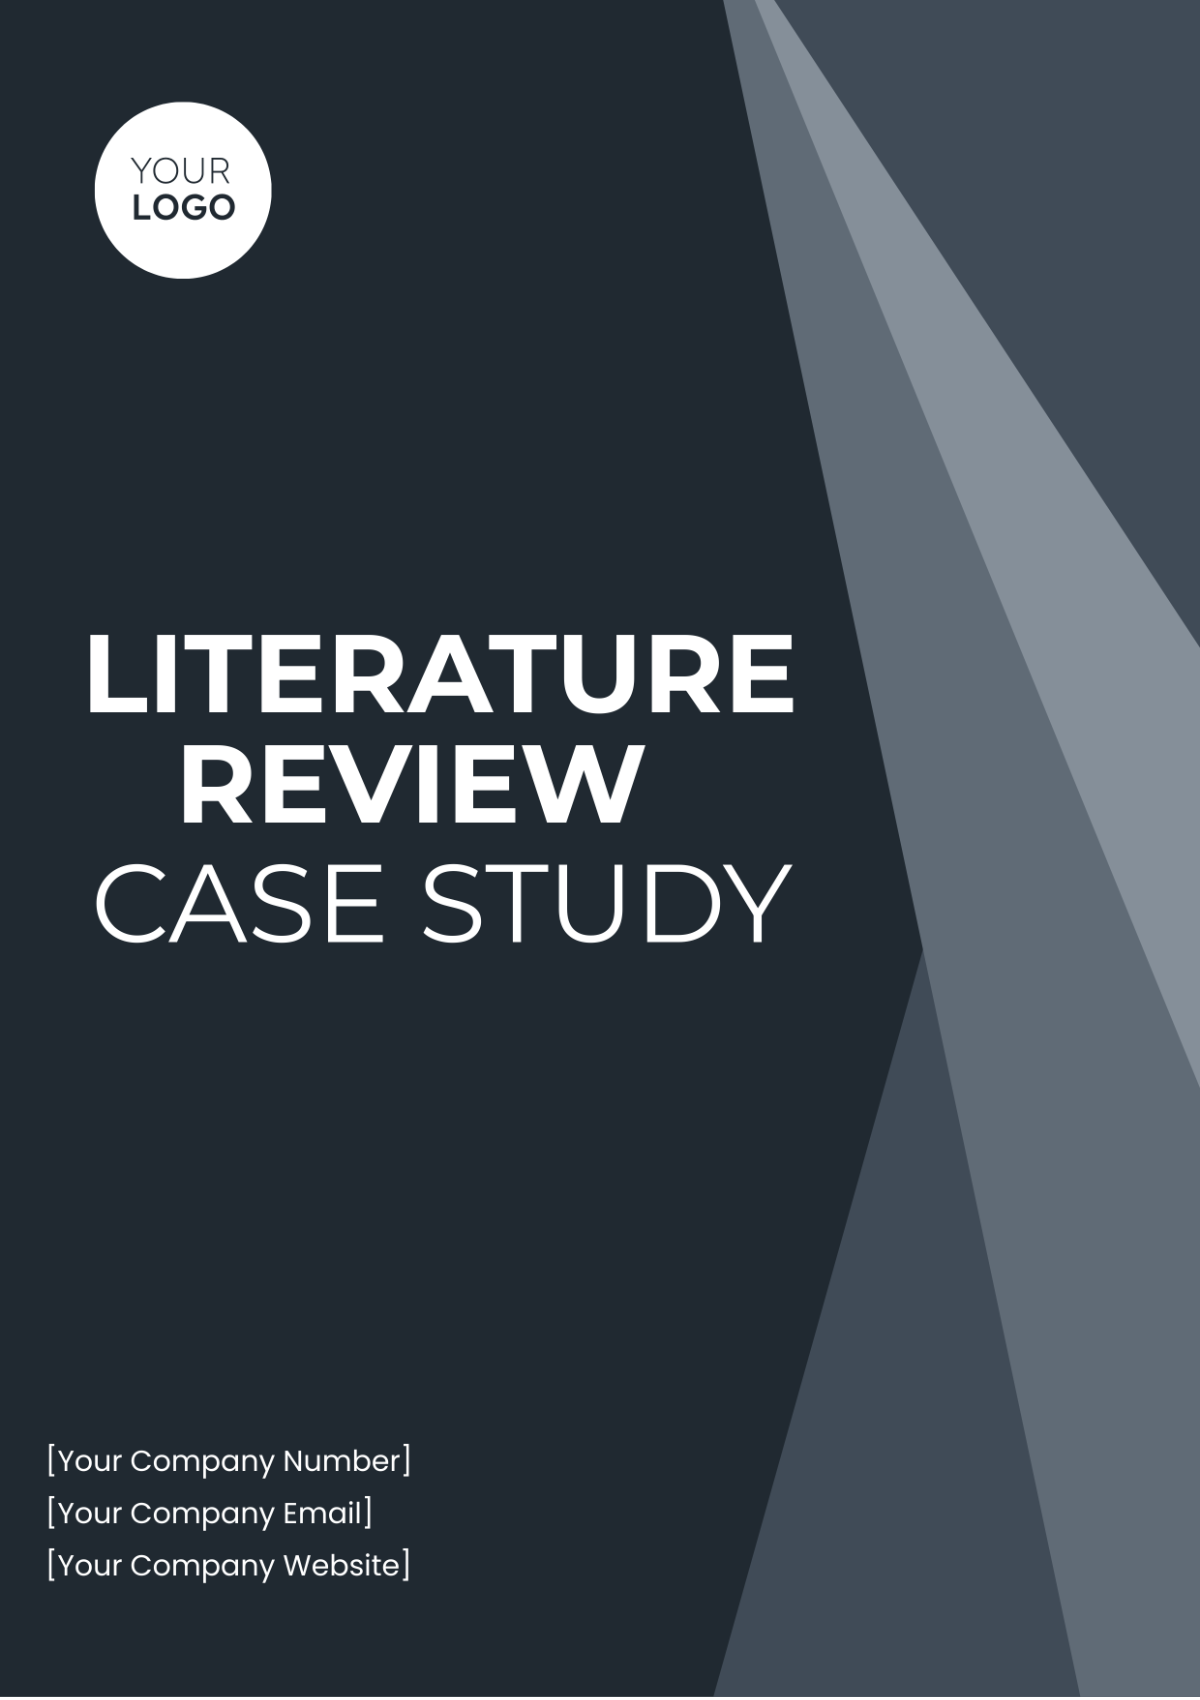 Literature Review Case Study Template